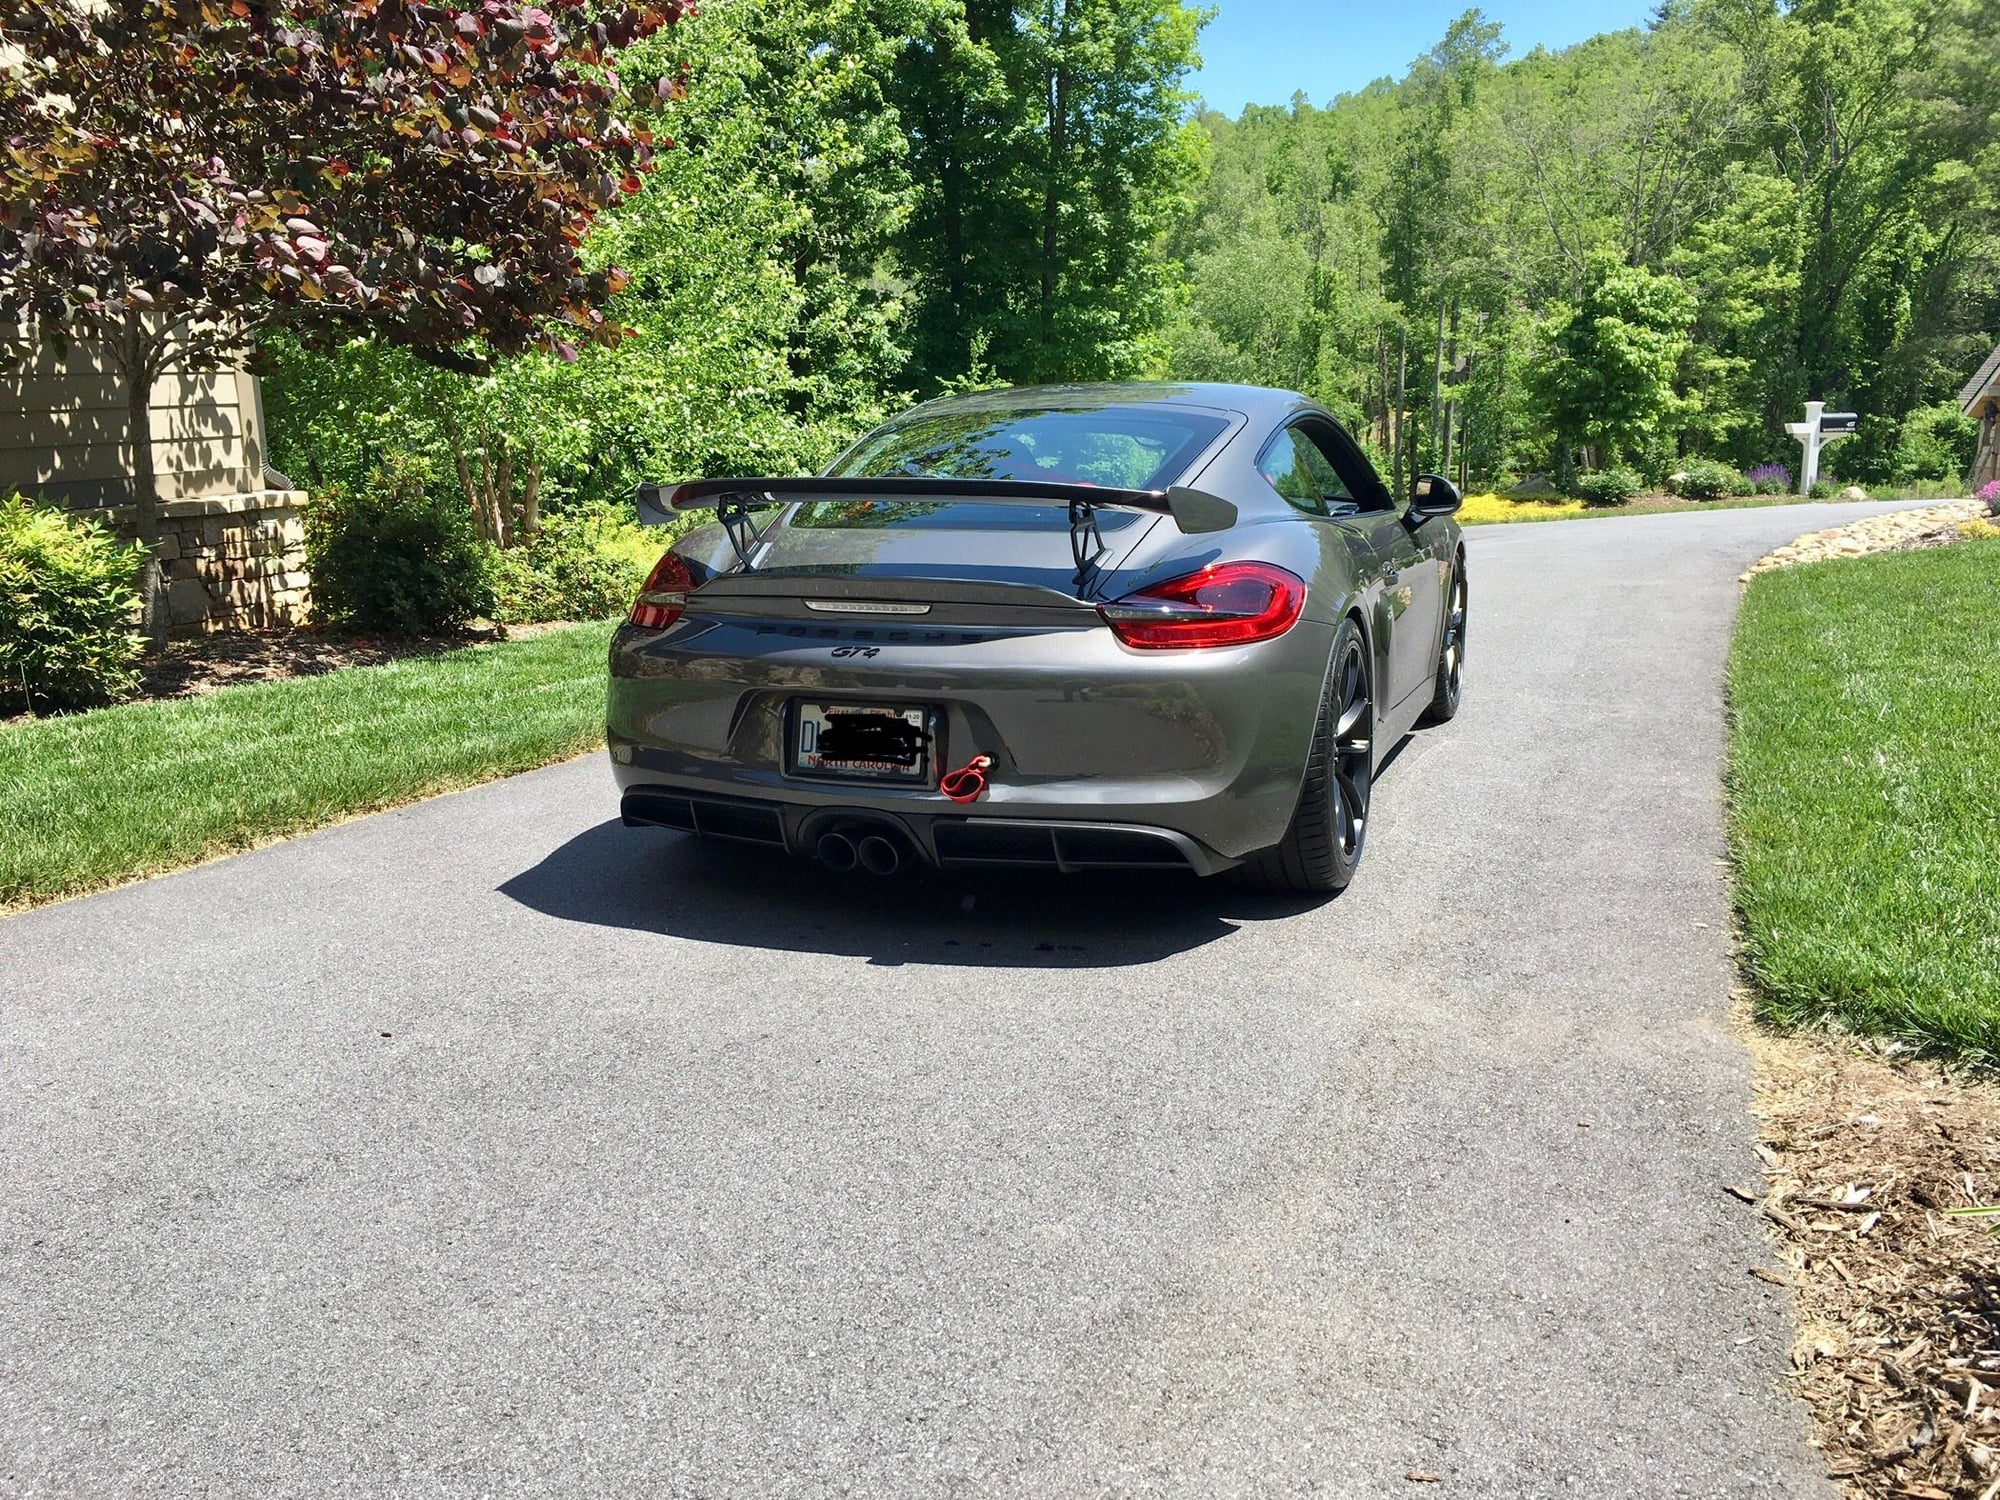 2016 Porsche Cayman GT4 - 2016 Porsche GT4 with X51 kit and BGB Tune - Used - VIN wp0ac2a85gk192039 - 7,700 Miles - 6 cyl - 2WD - Manual - Coupe - Gray - Asheville, NC 28803, United States